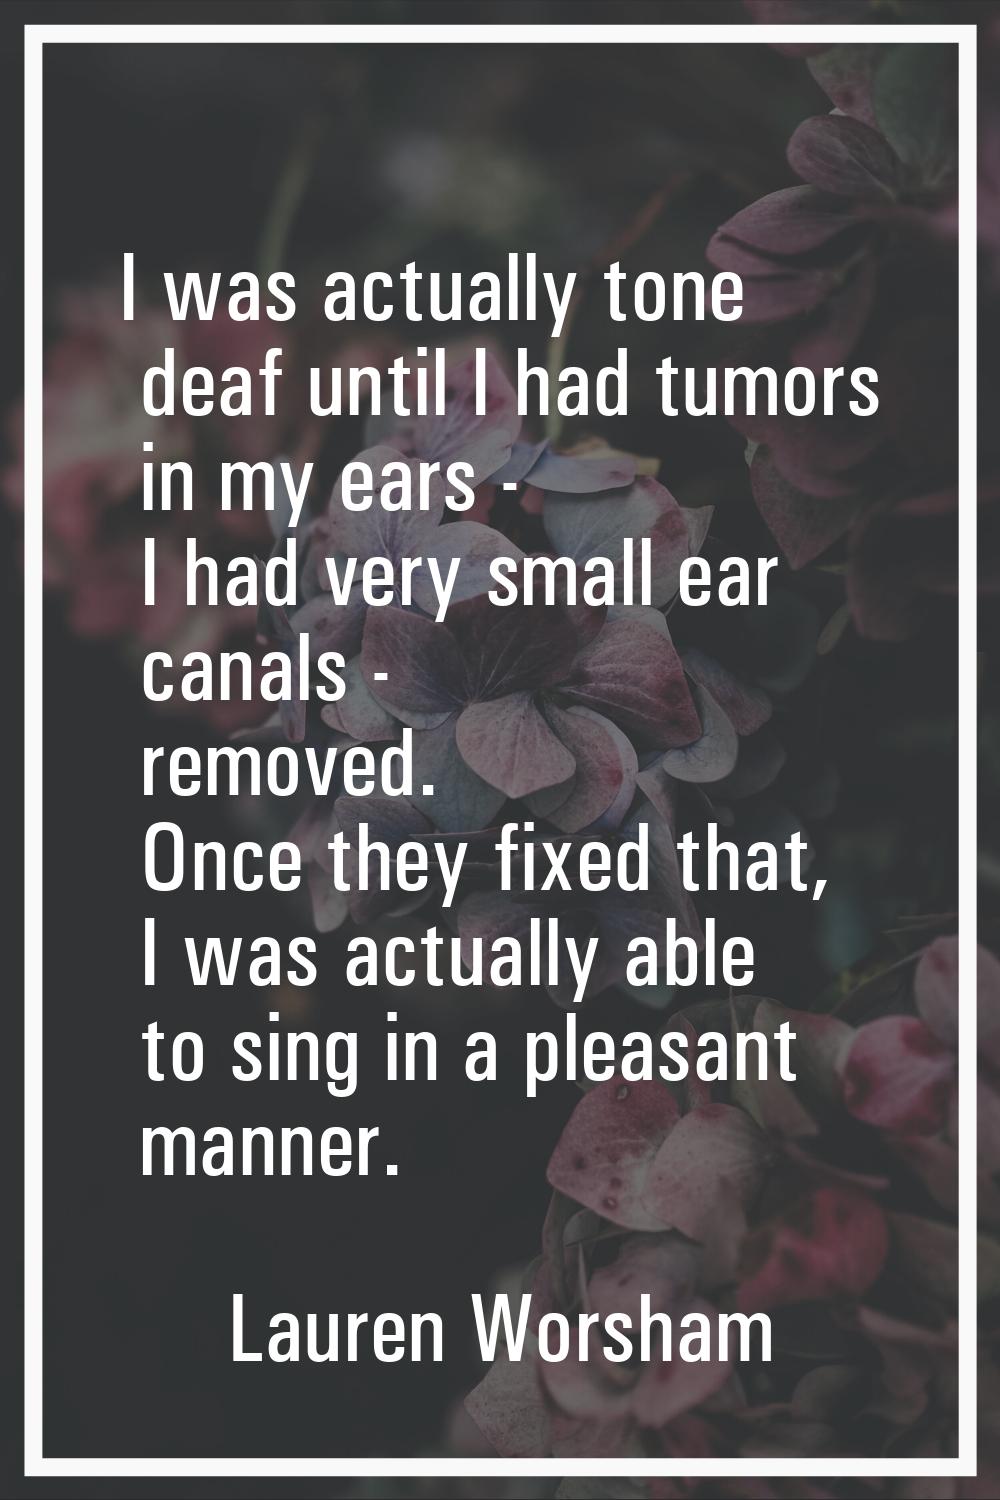 I was actually tone deaf until I had tumors in my ears - I had very small ear canals - removed. Onc